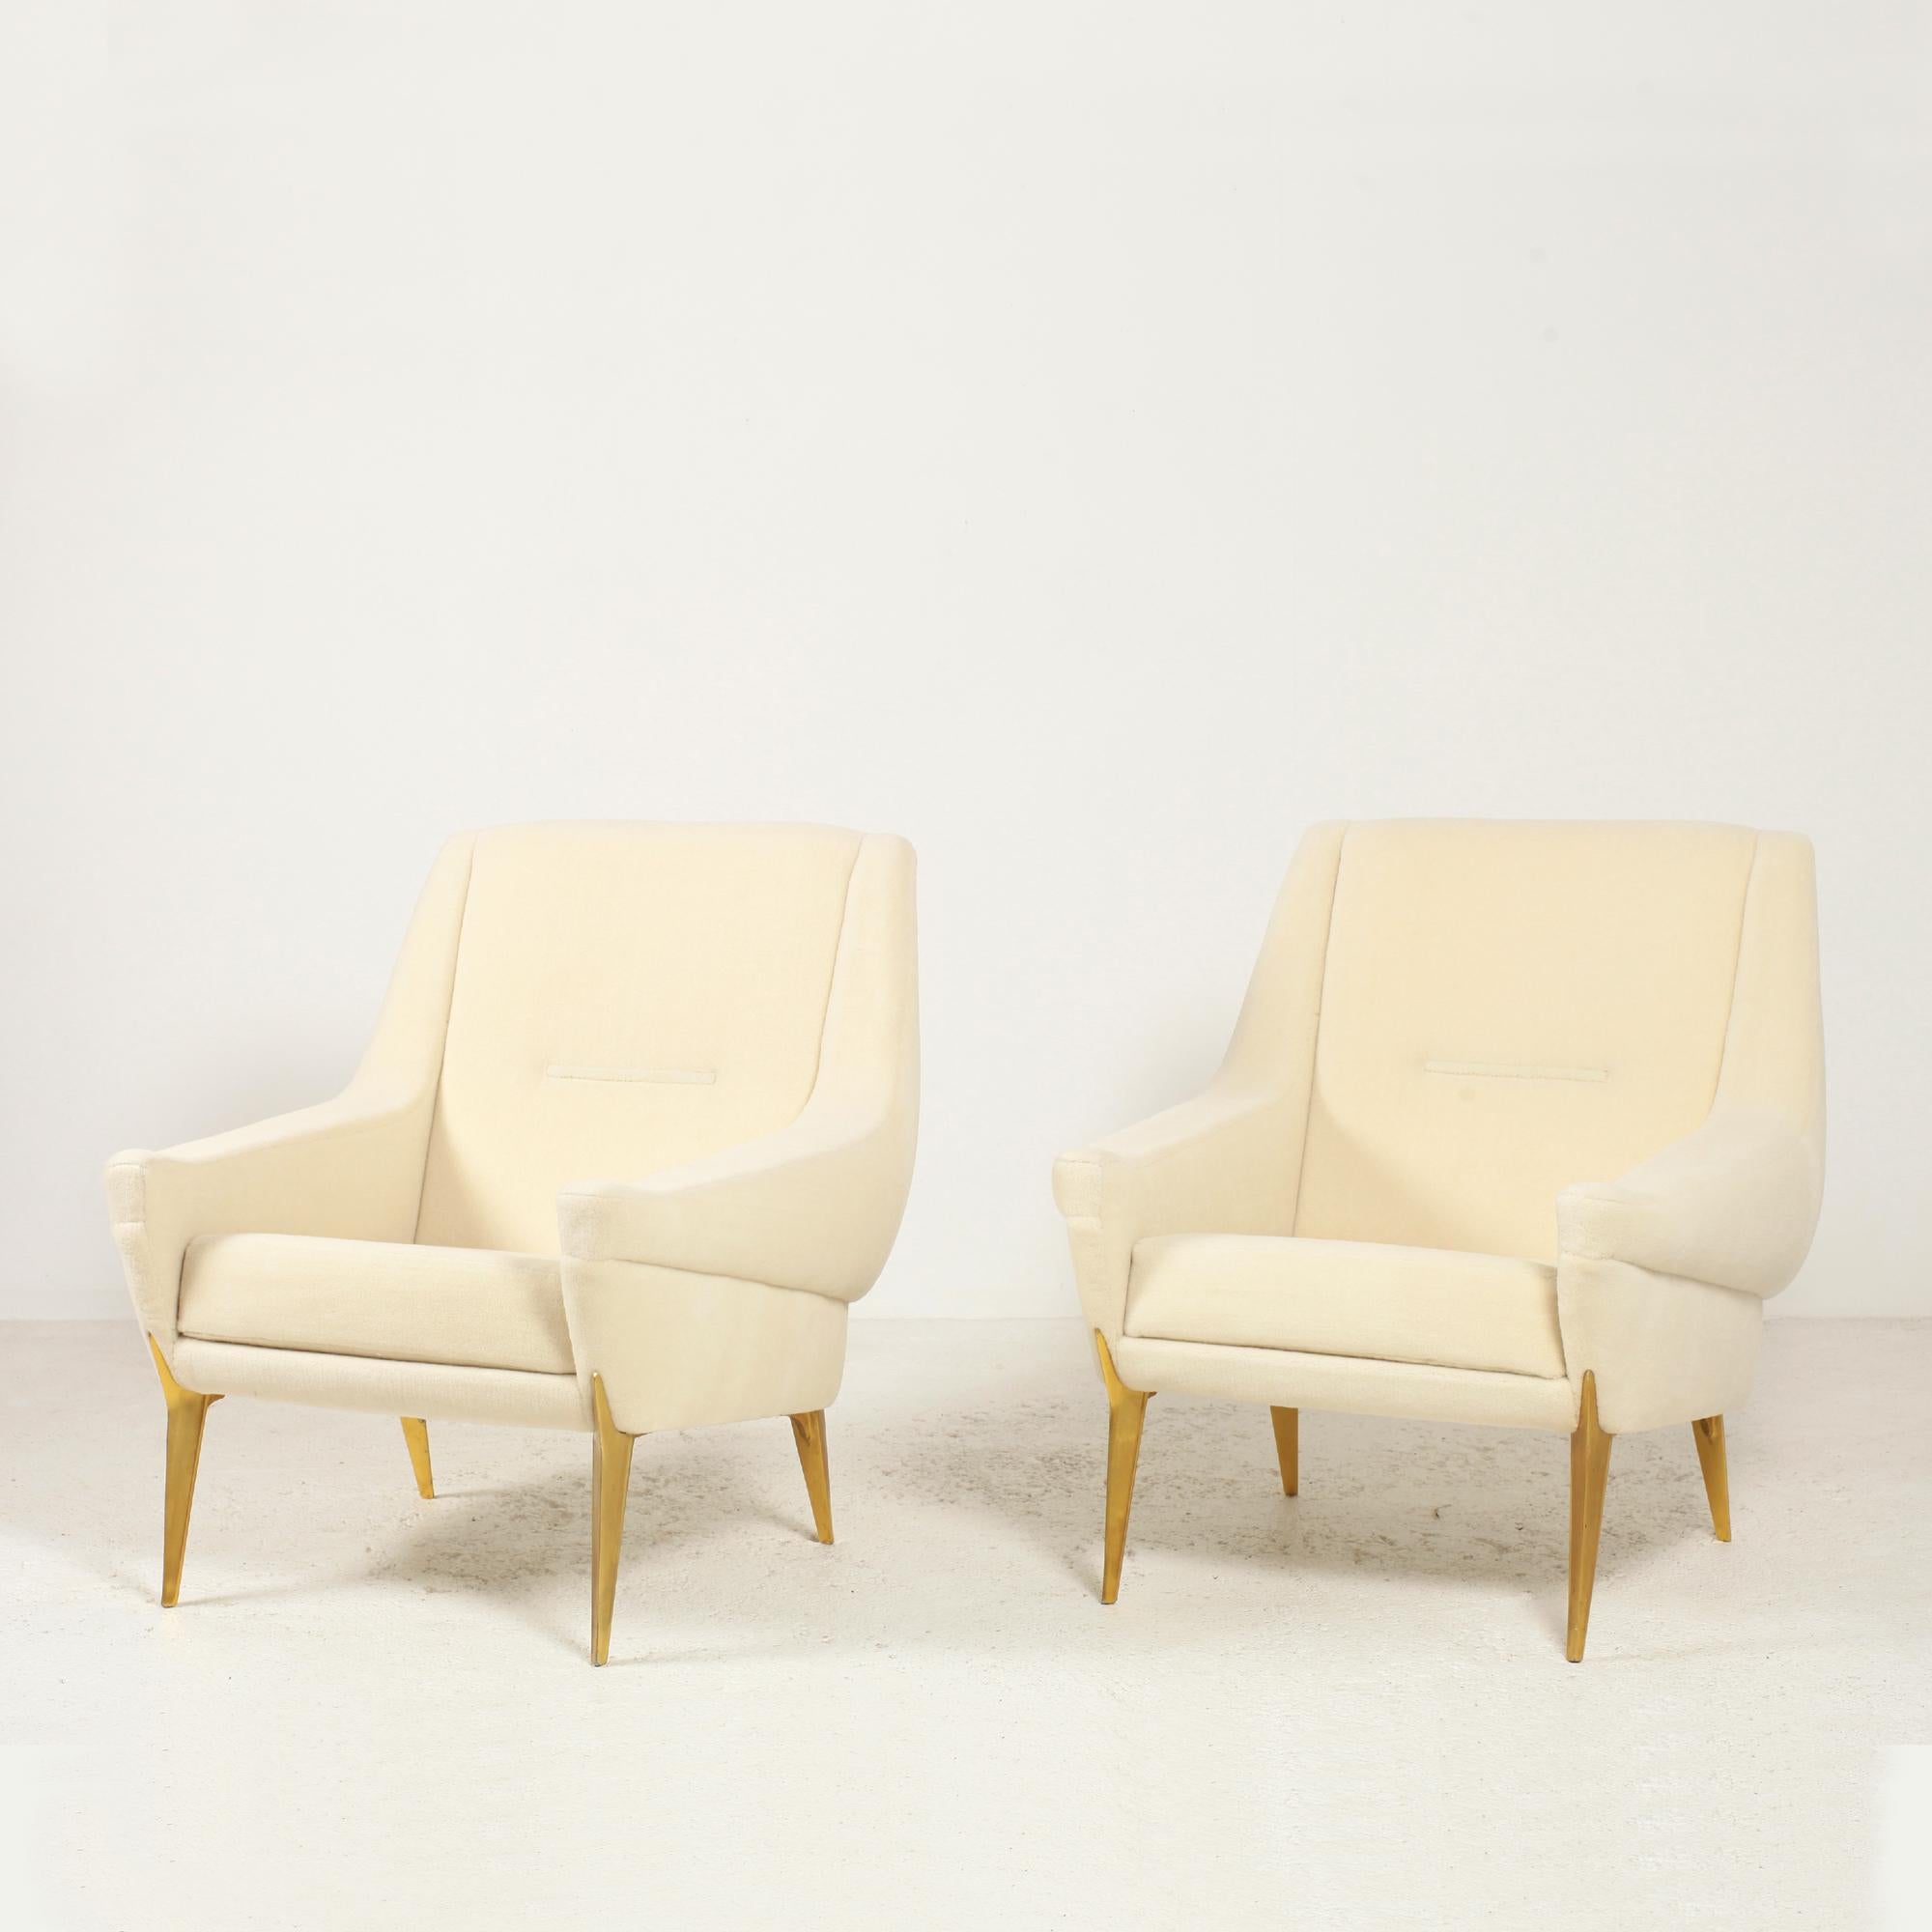 Very elegant and rare pair of lounge armchairs by Charles Ramos for Castellaneta France circa 1950.
The feet are in original golden anodized aluminum.
Structure in massive wood. Completely redone (foam and fabric).
Reupholstered with ivory wool